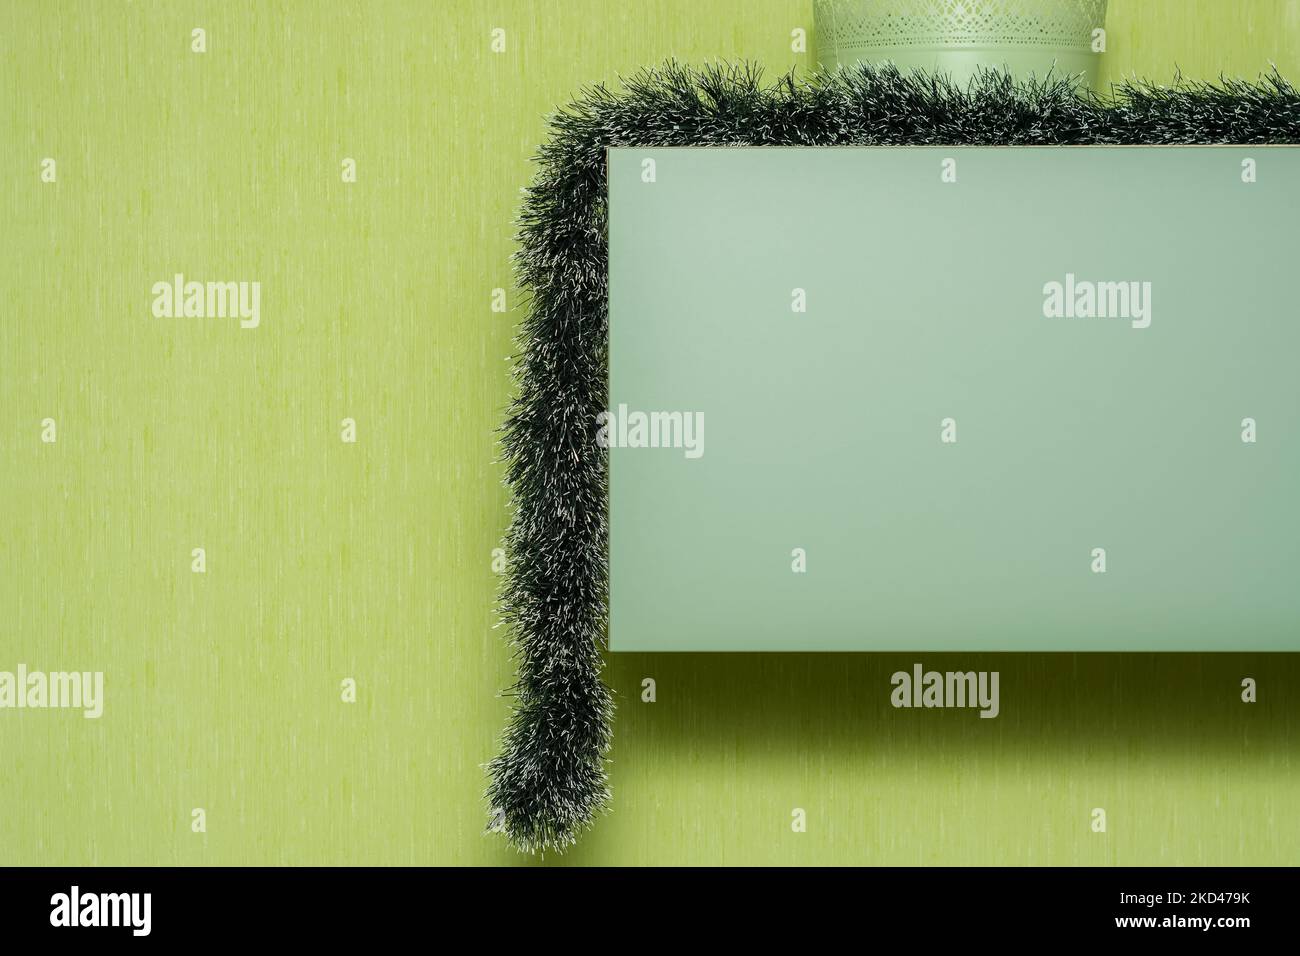 Long green Christmas tree garland hangs from a wall cabinet against a green wall. Stock Photo